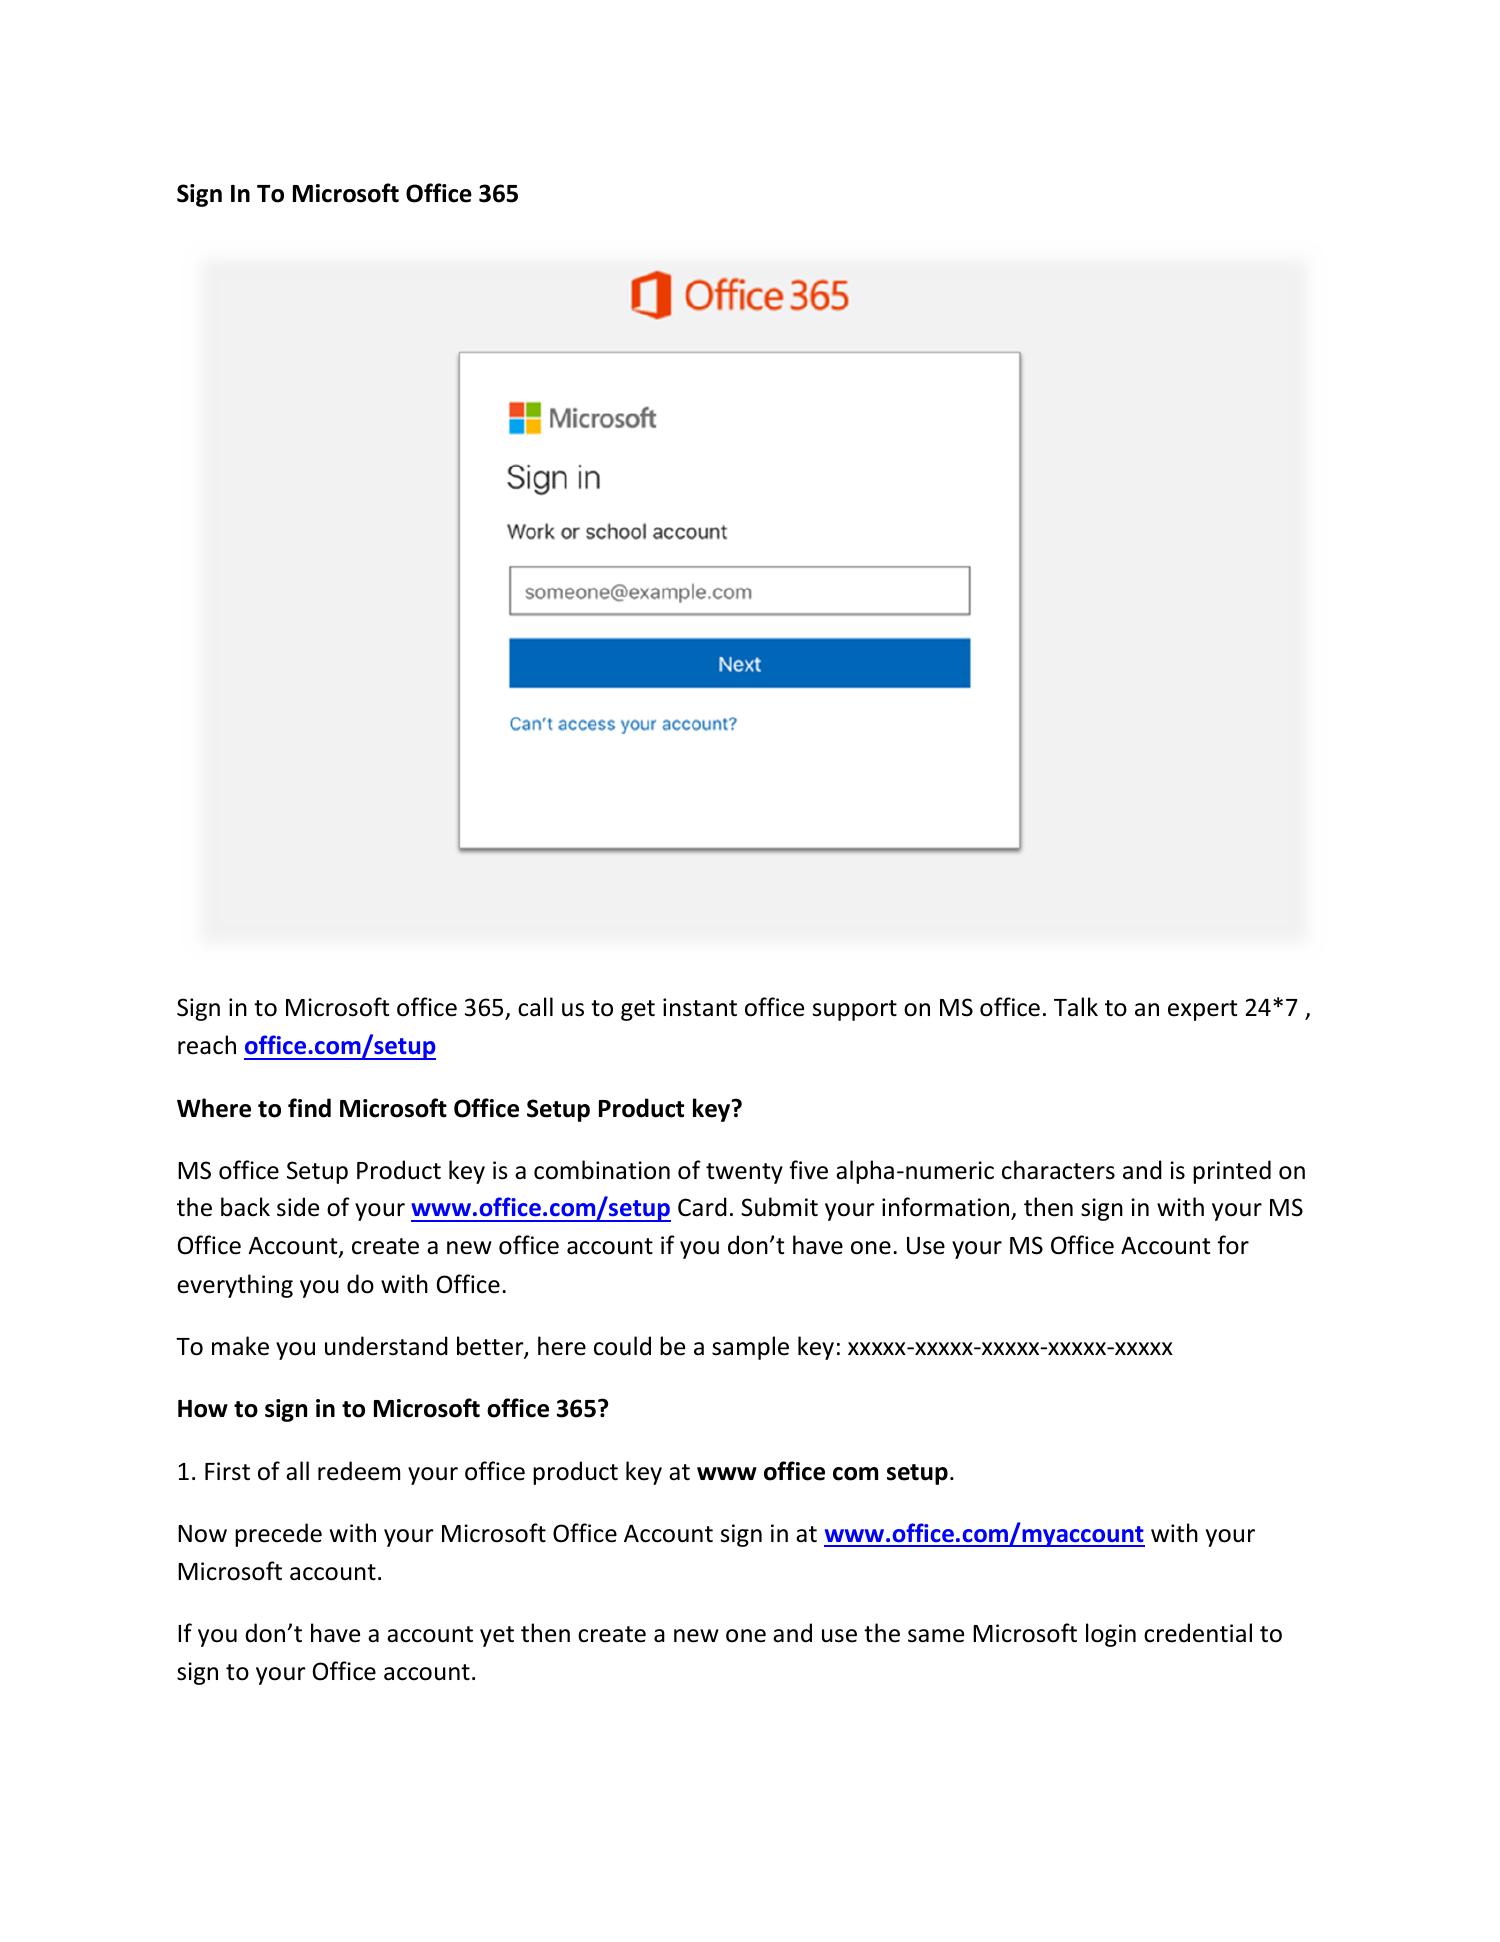 Sign In to Office 365 Login Microsoft Office.pdf | DocDroid